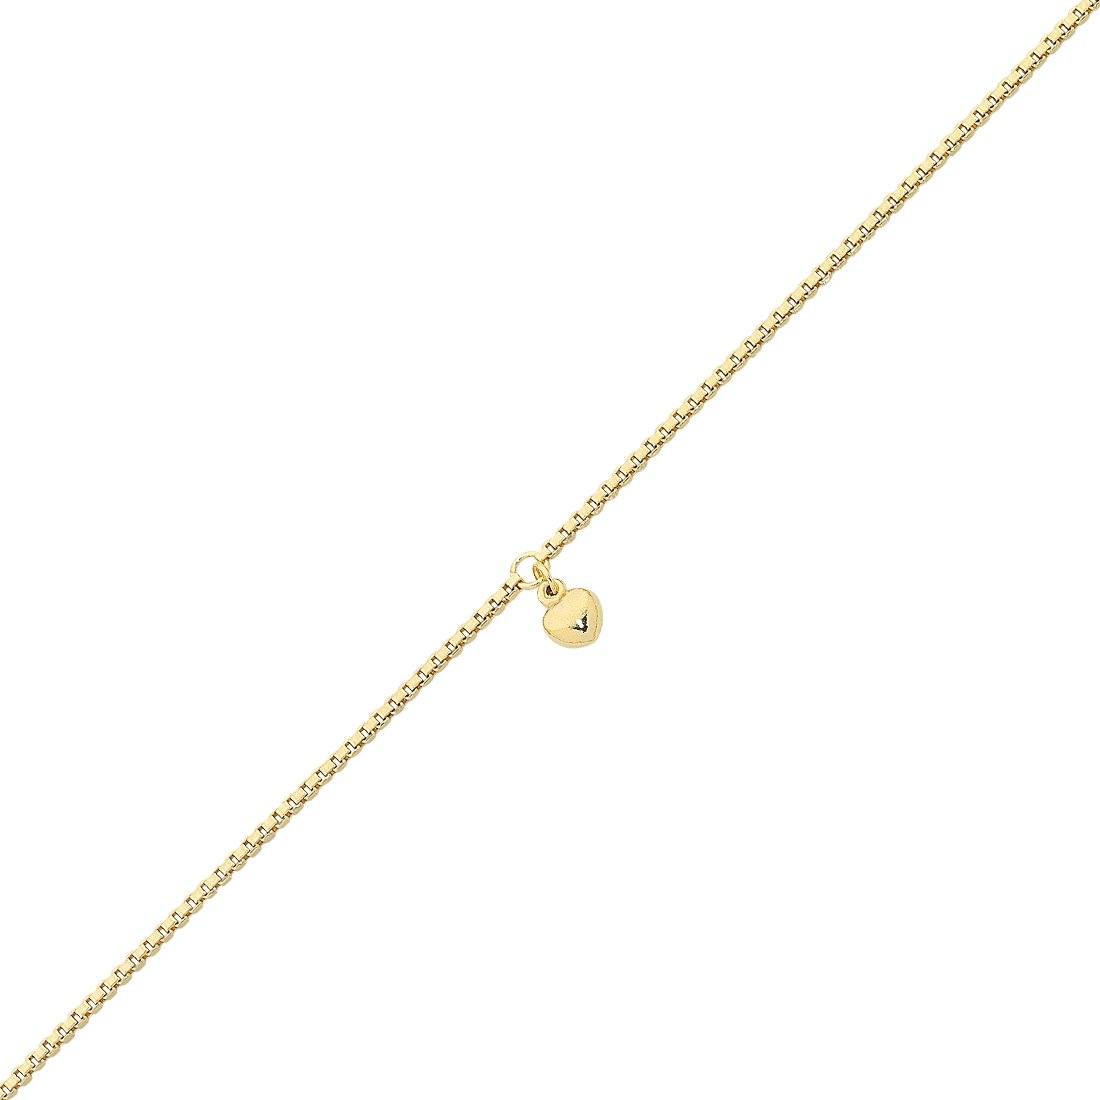 9ct Yellow Gold Silver Infused Anklet with Puff Heart Anklet Bevilles 